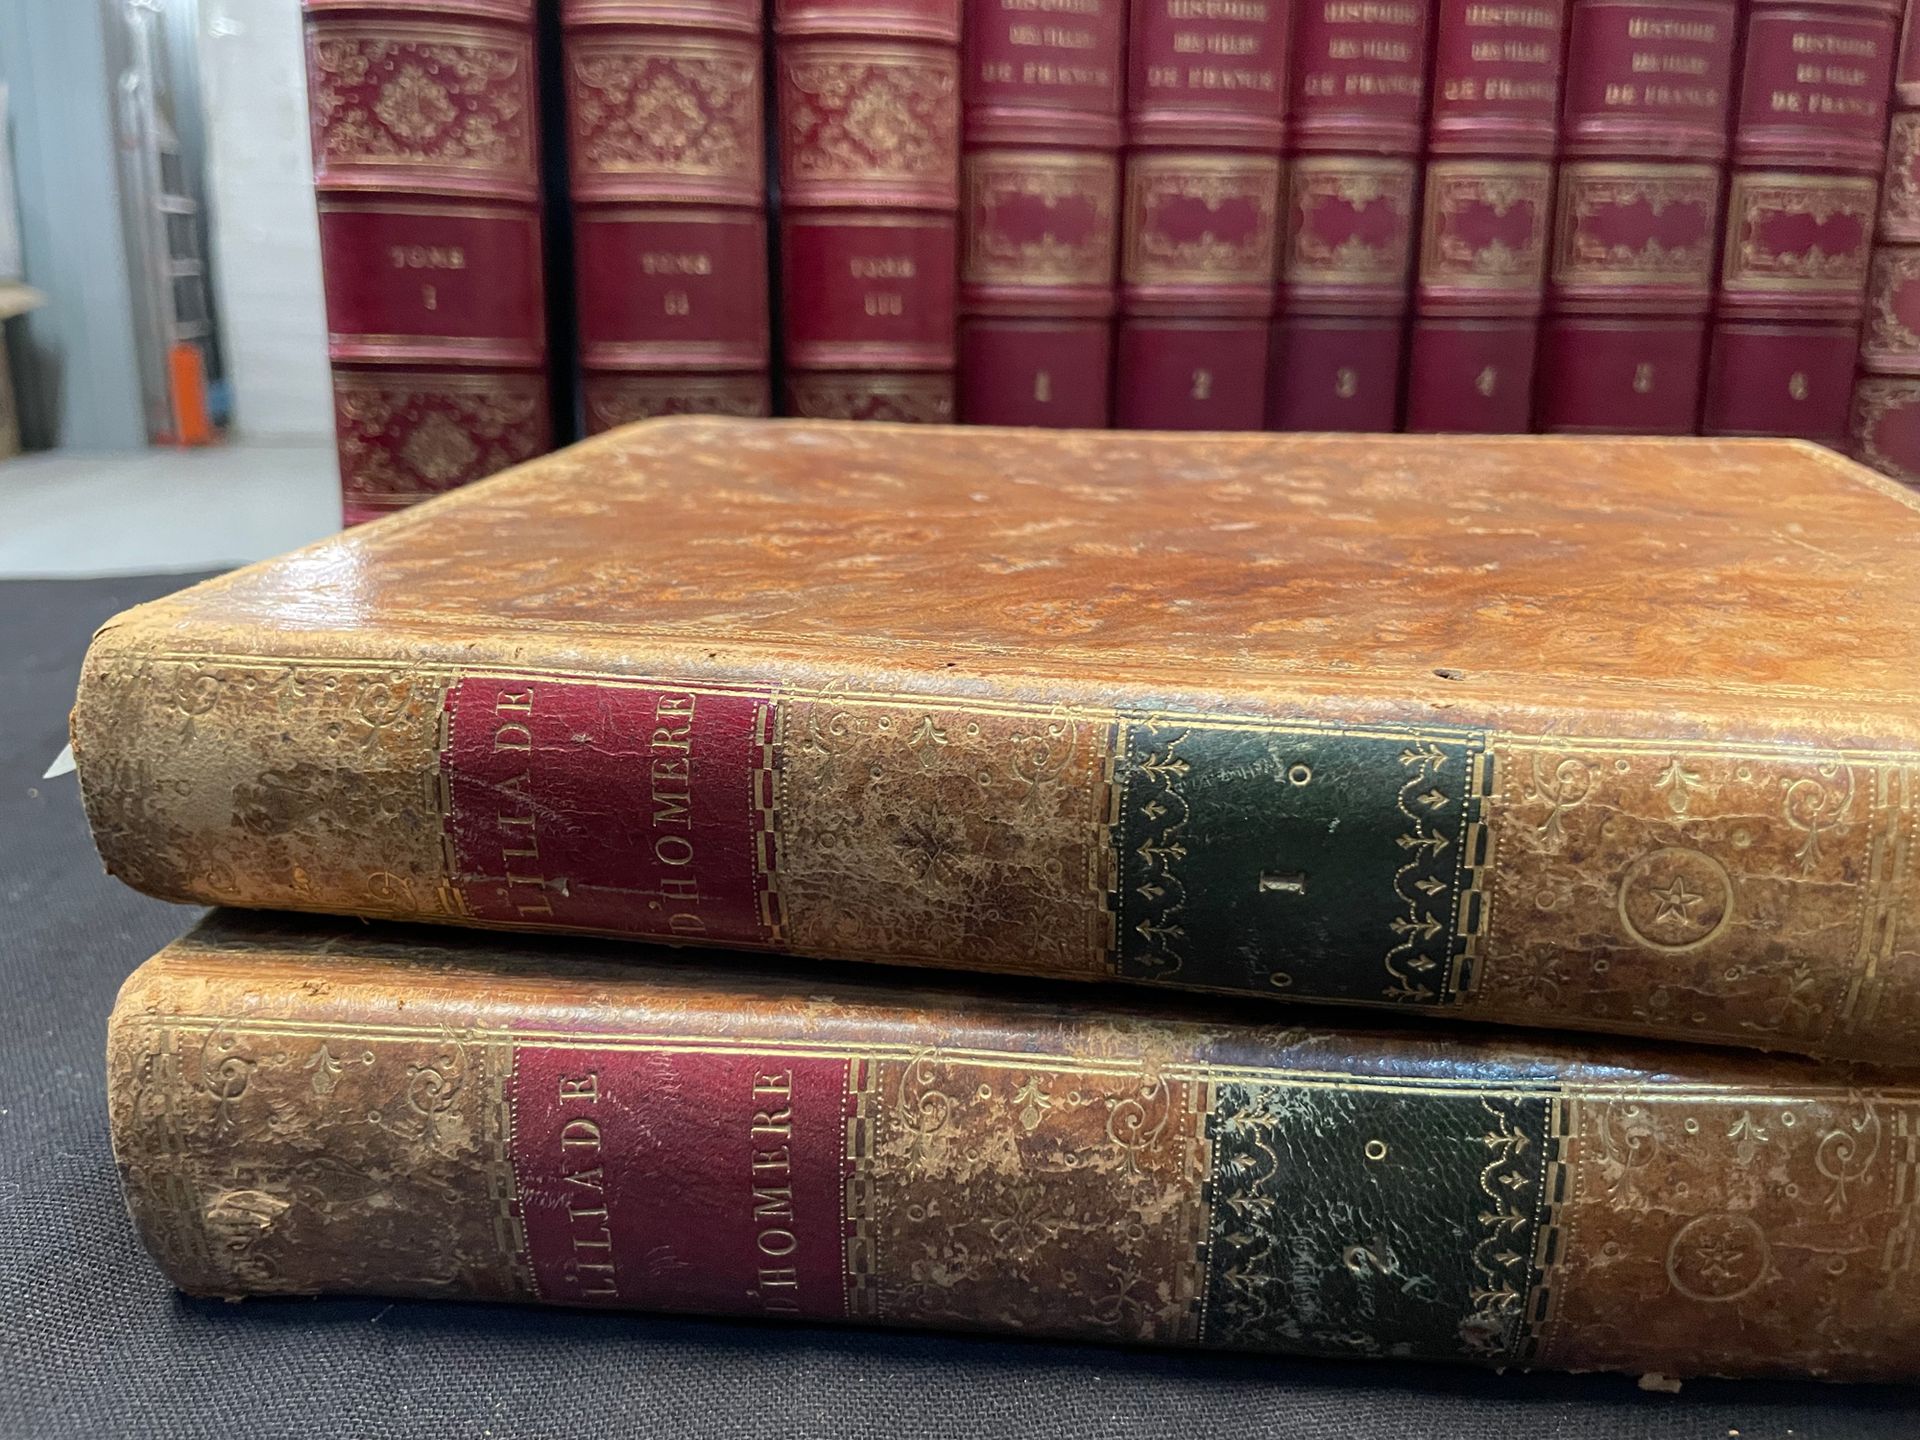 HOMERE The Iliad and the Odyssey. 1795.
2 volumes
As is